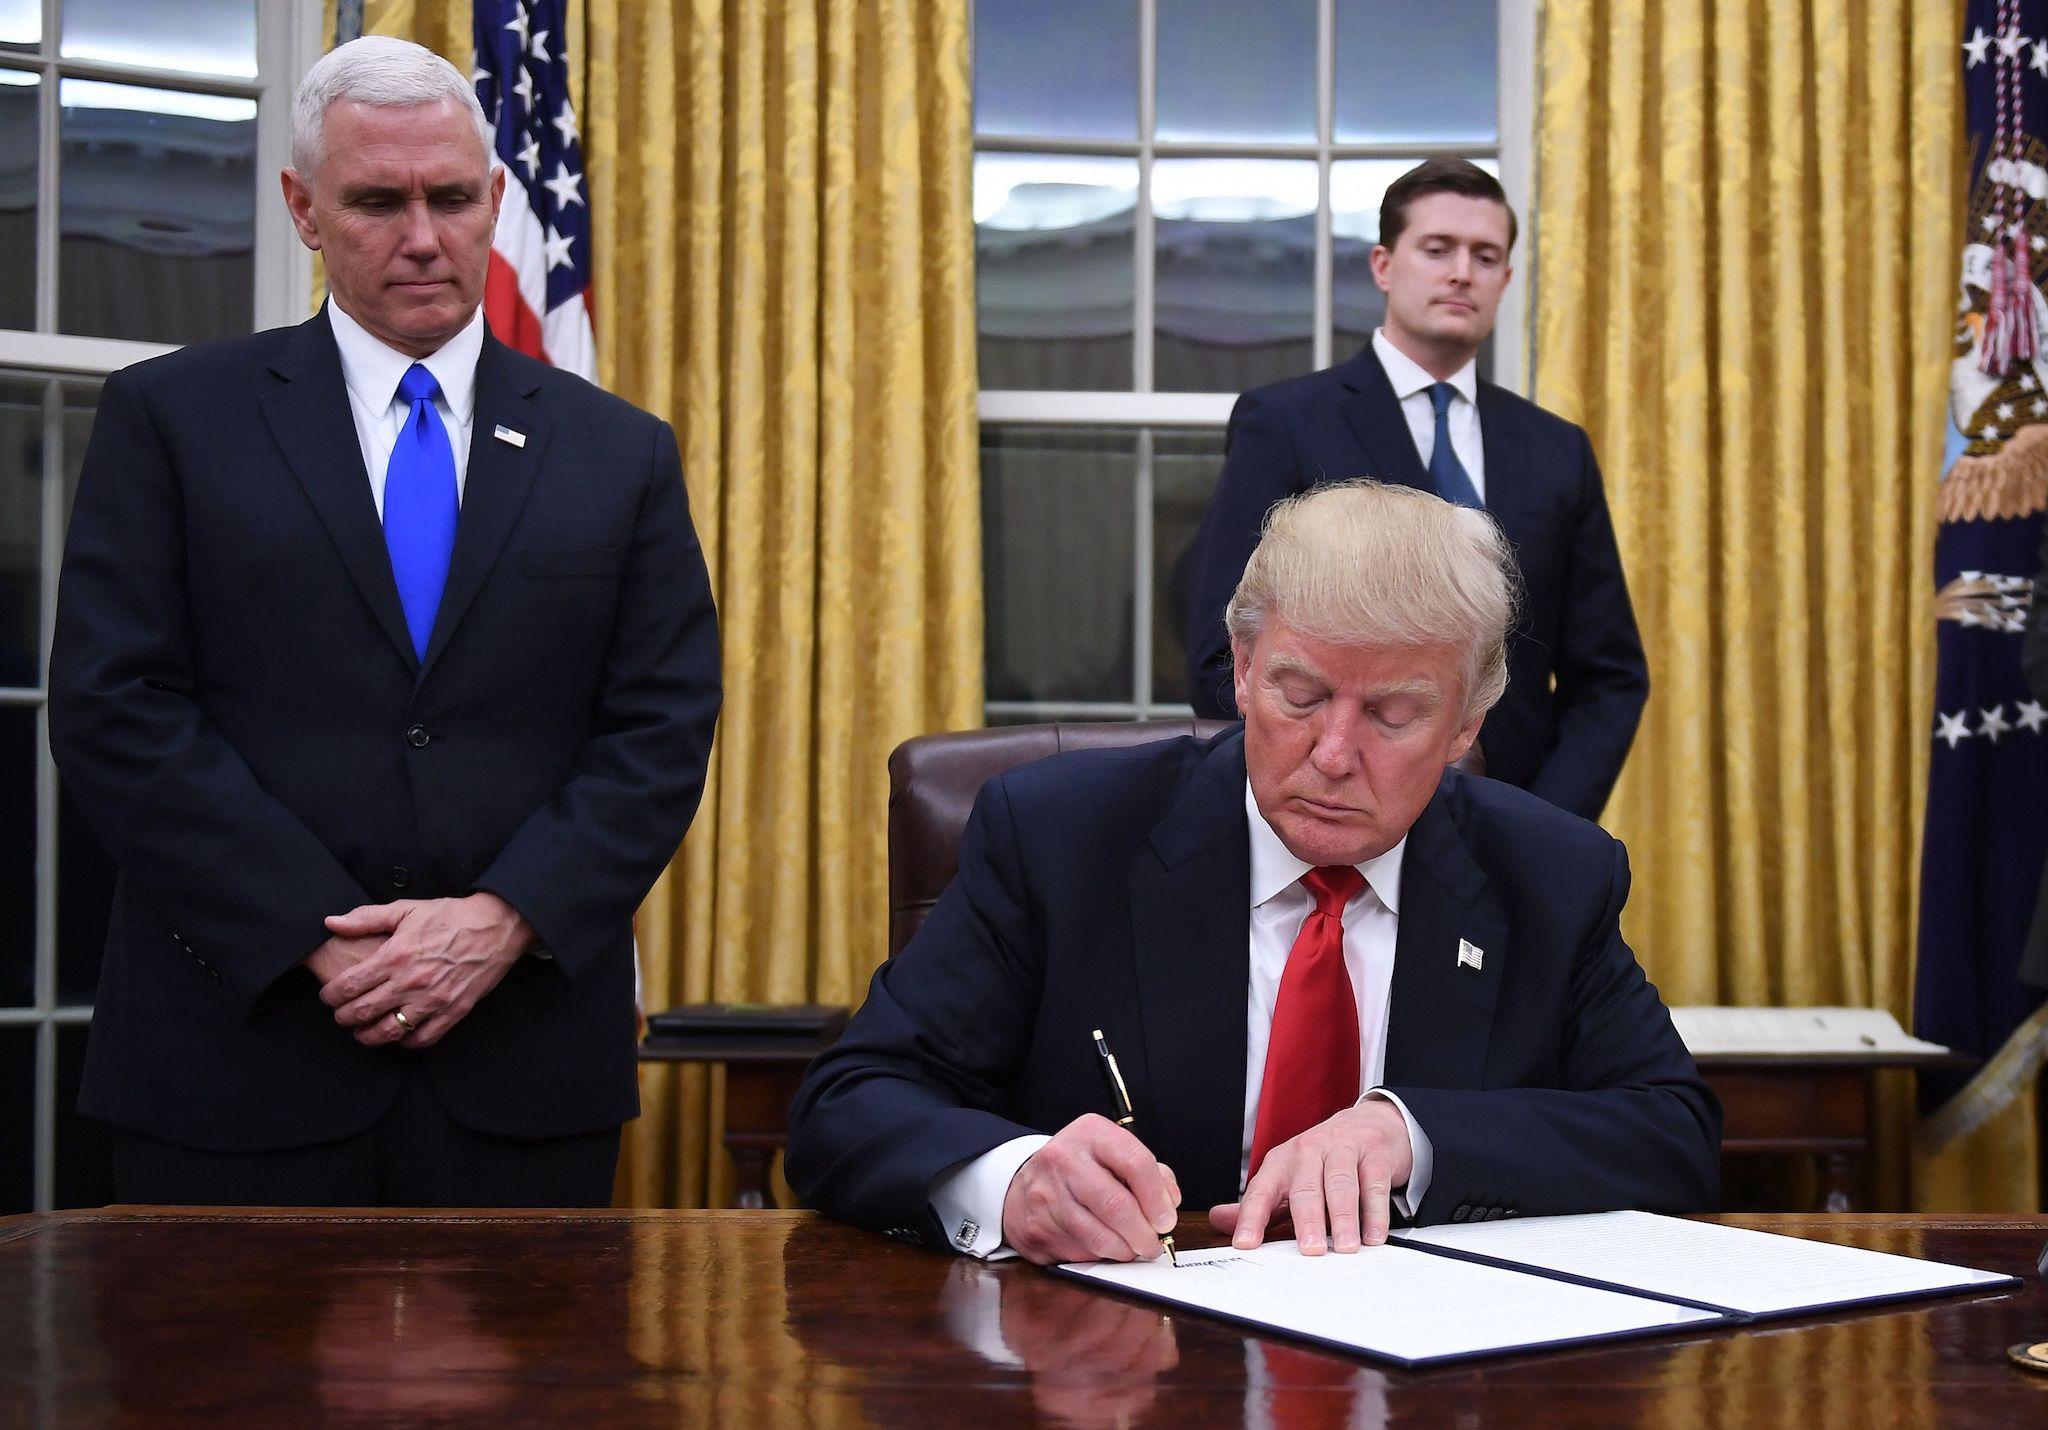 US President Donald Trump signs an executive order as Vice President Mike Pence looks on at the White House in Washington, DC on January 20, 2017